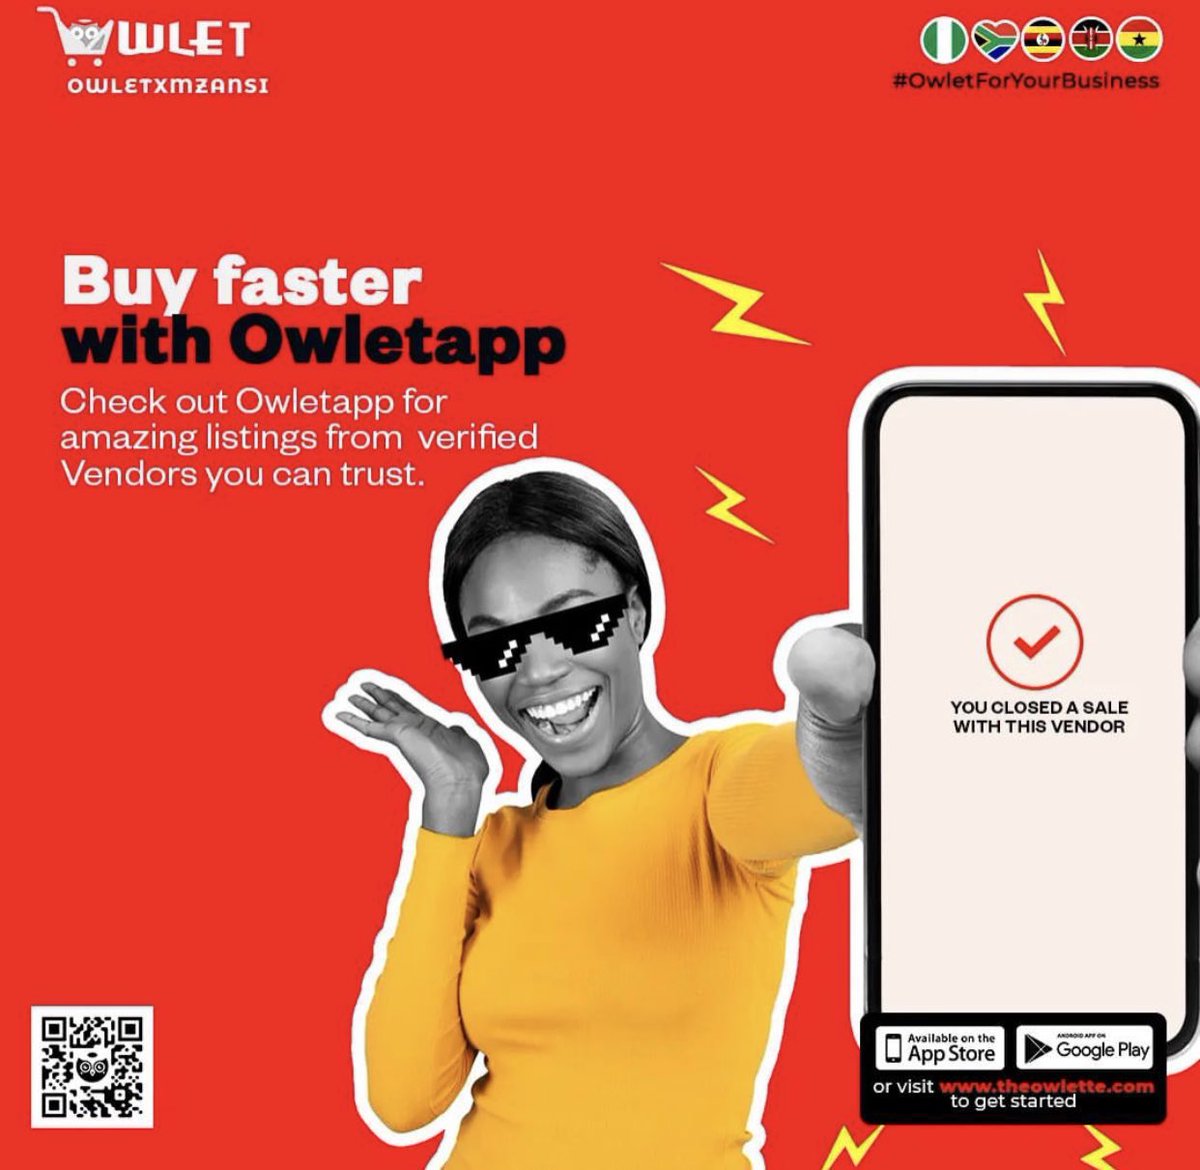 Owlet vendors are verified so you get exactly what you order #OwletForBusiness